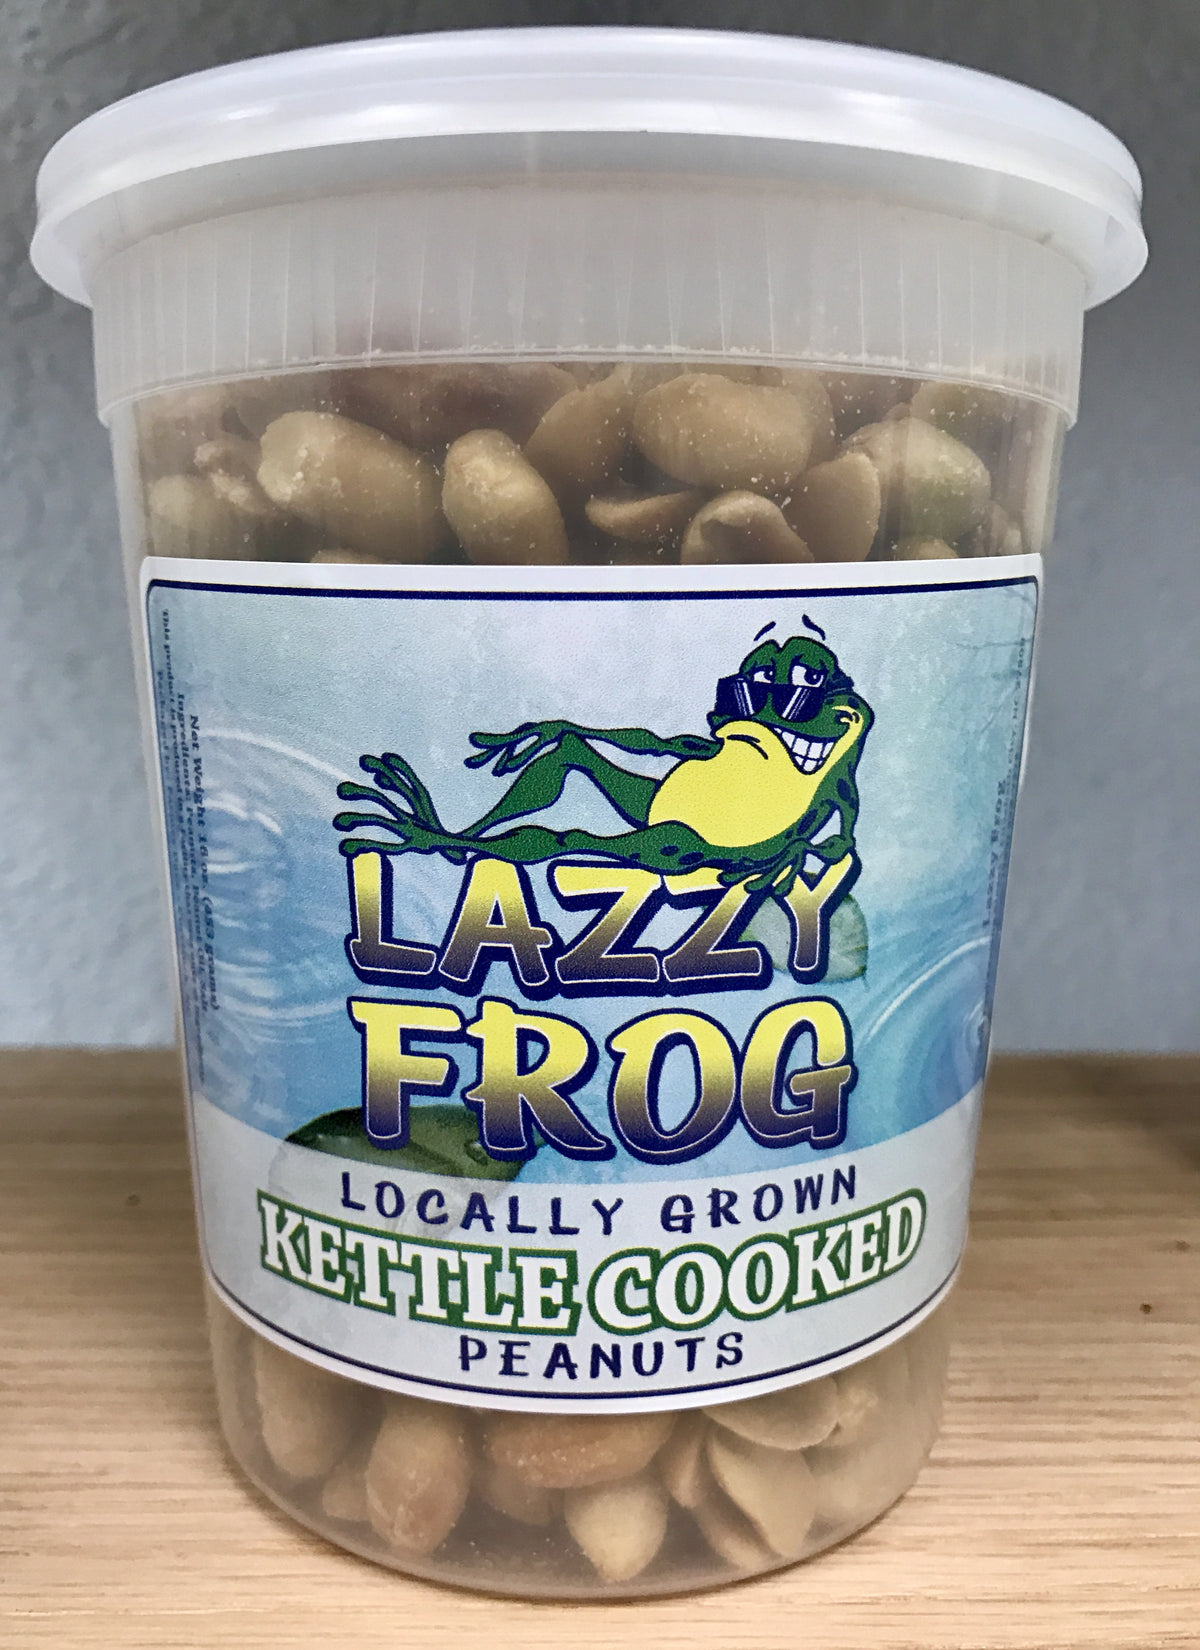 Lazzy Frog Kettle Roasted Peanuts*